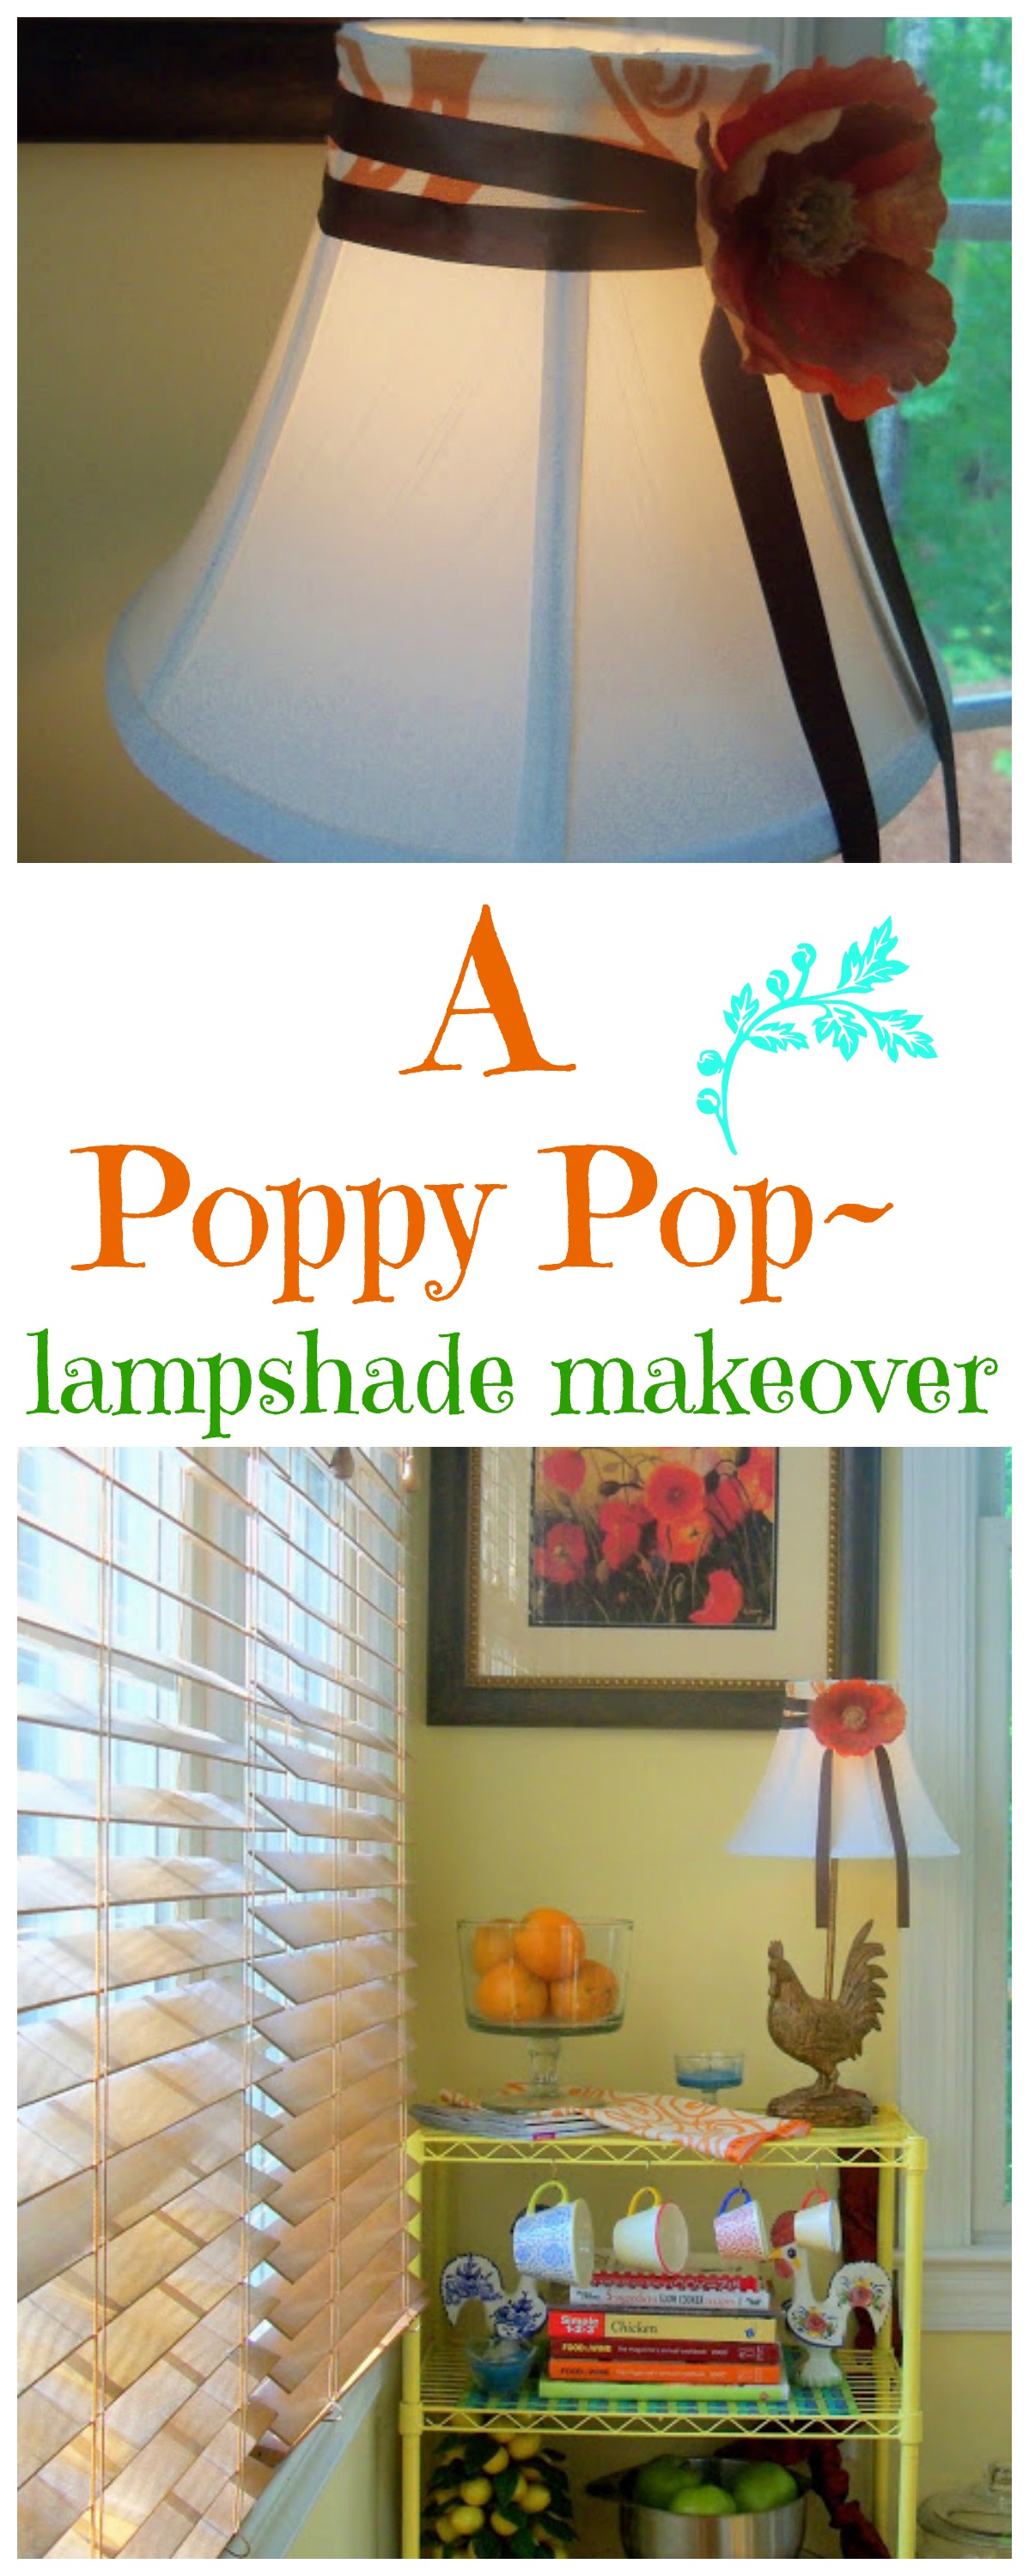 a poppy lampshade makeover